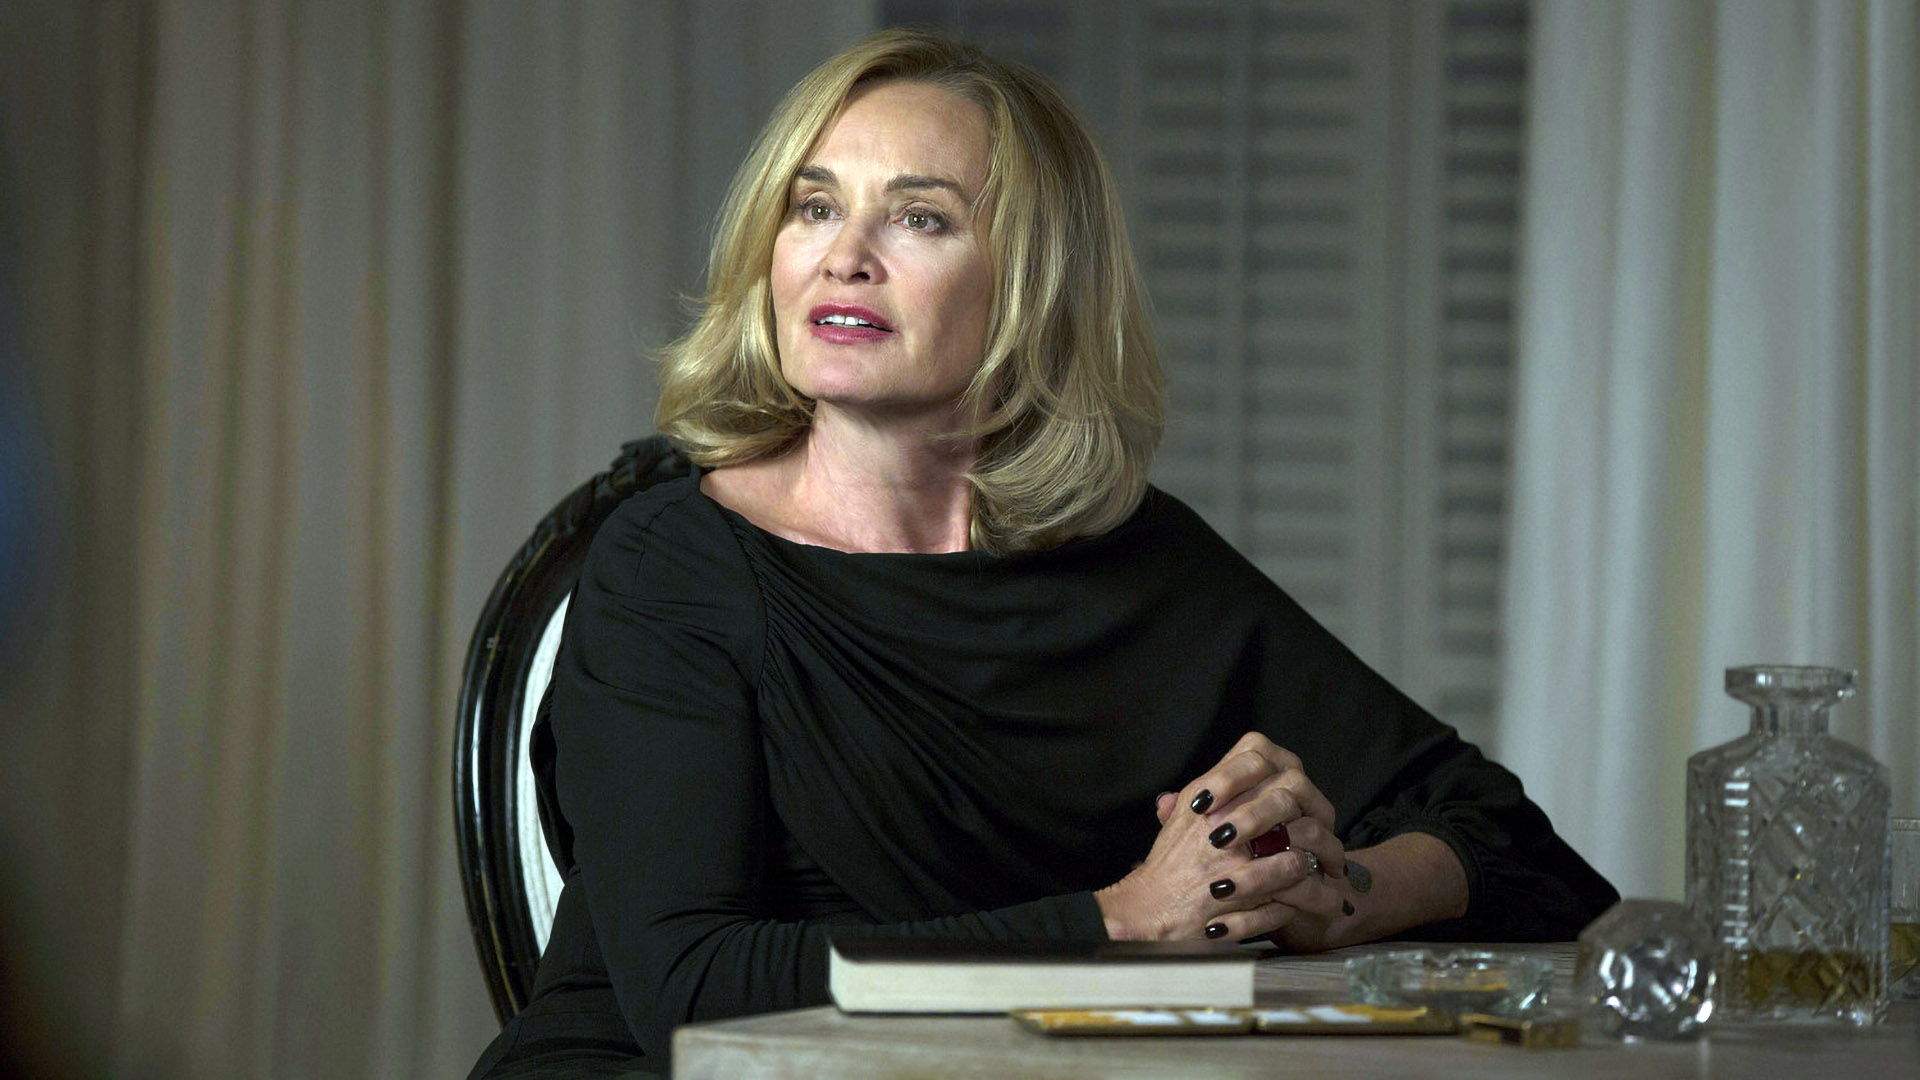 AHS' Jessica Lange Drops a Bombshell About Potential Retirement